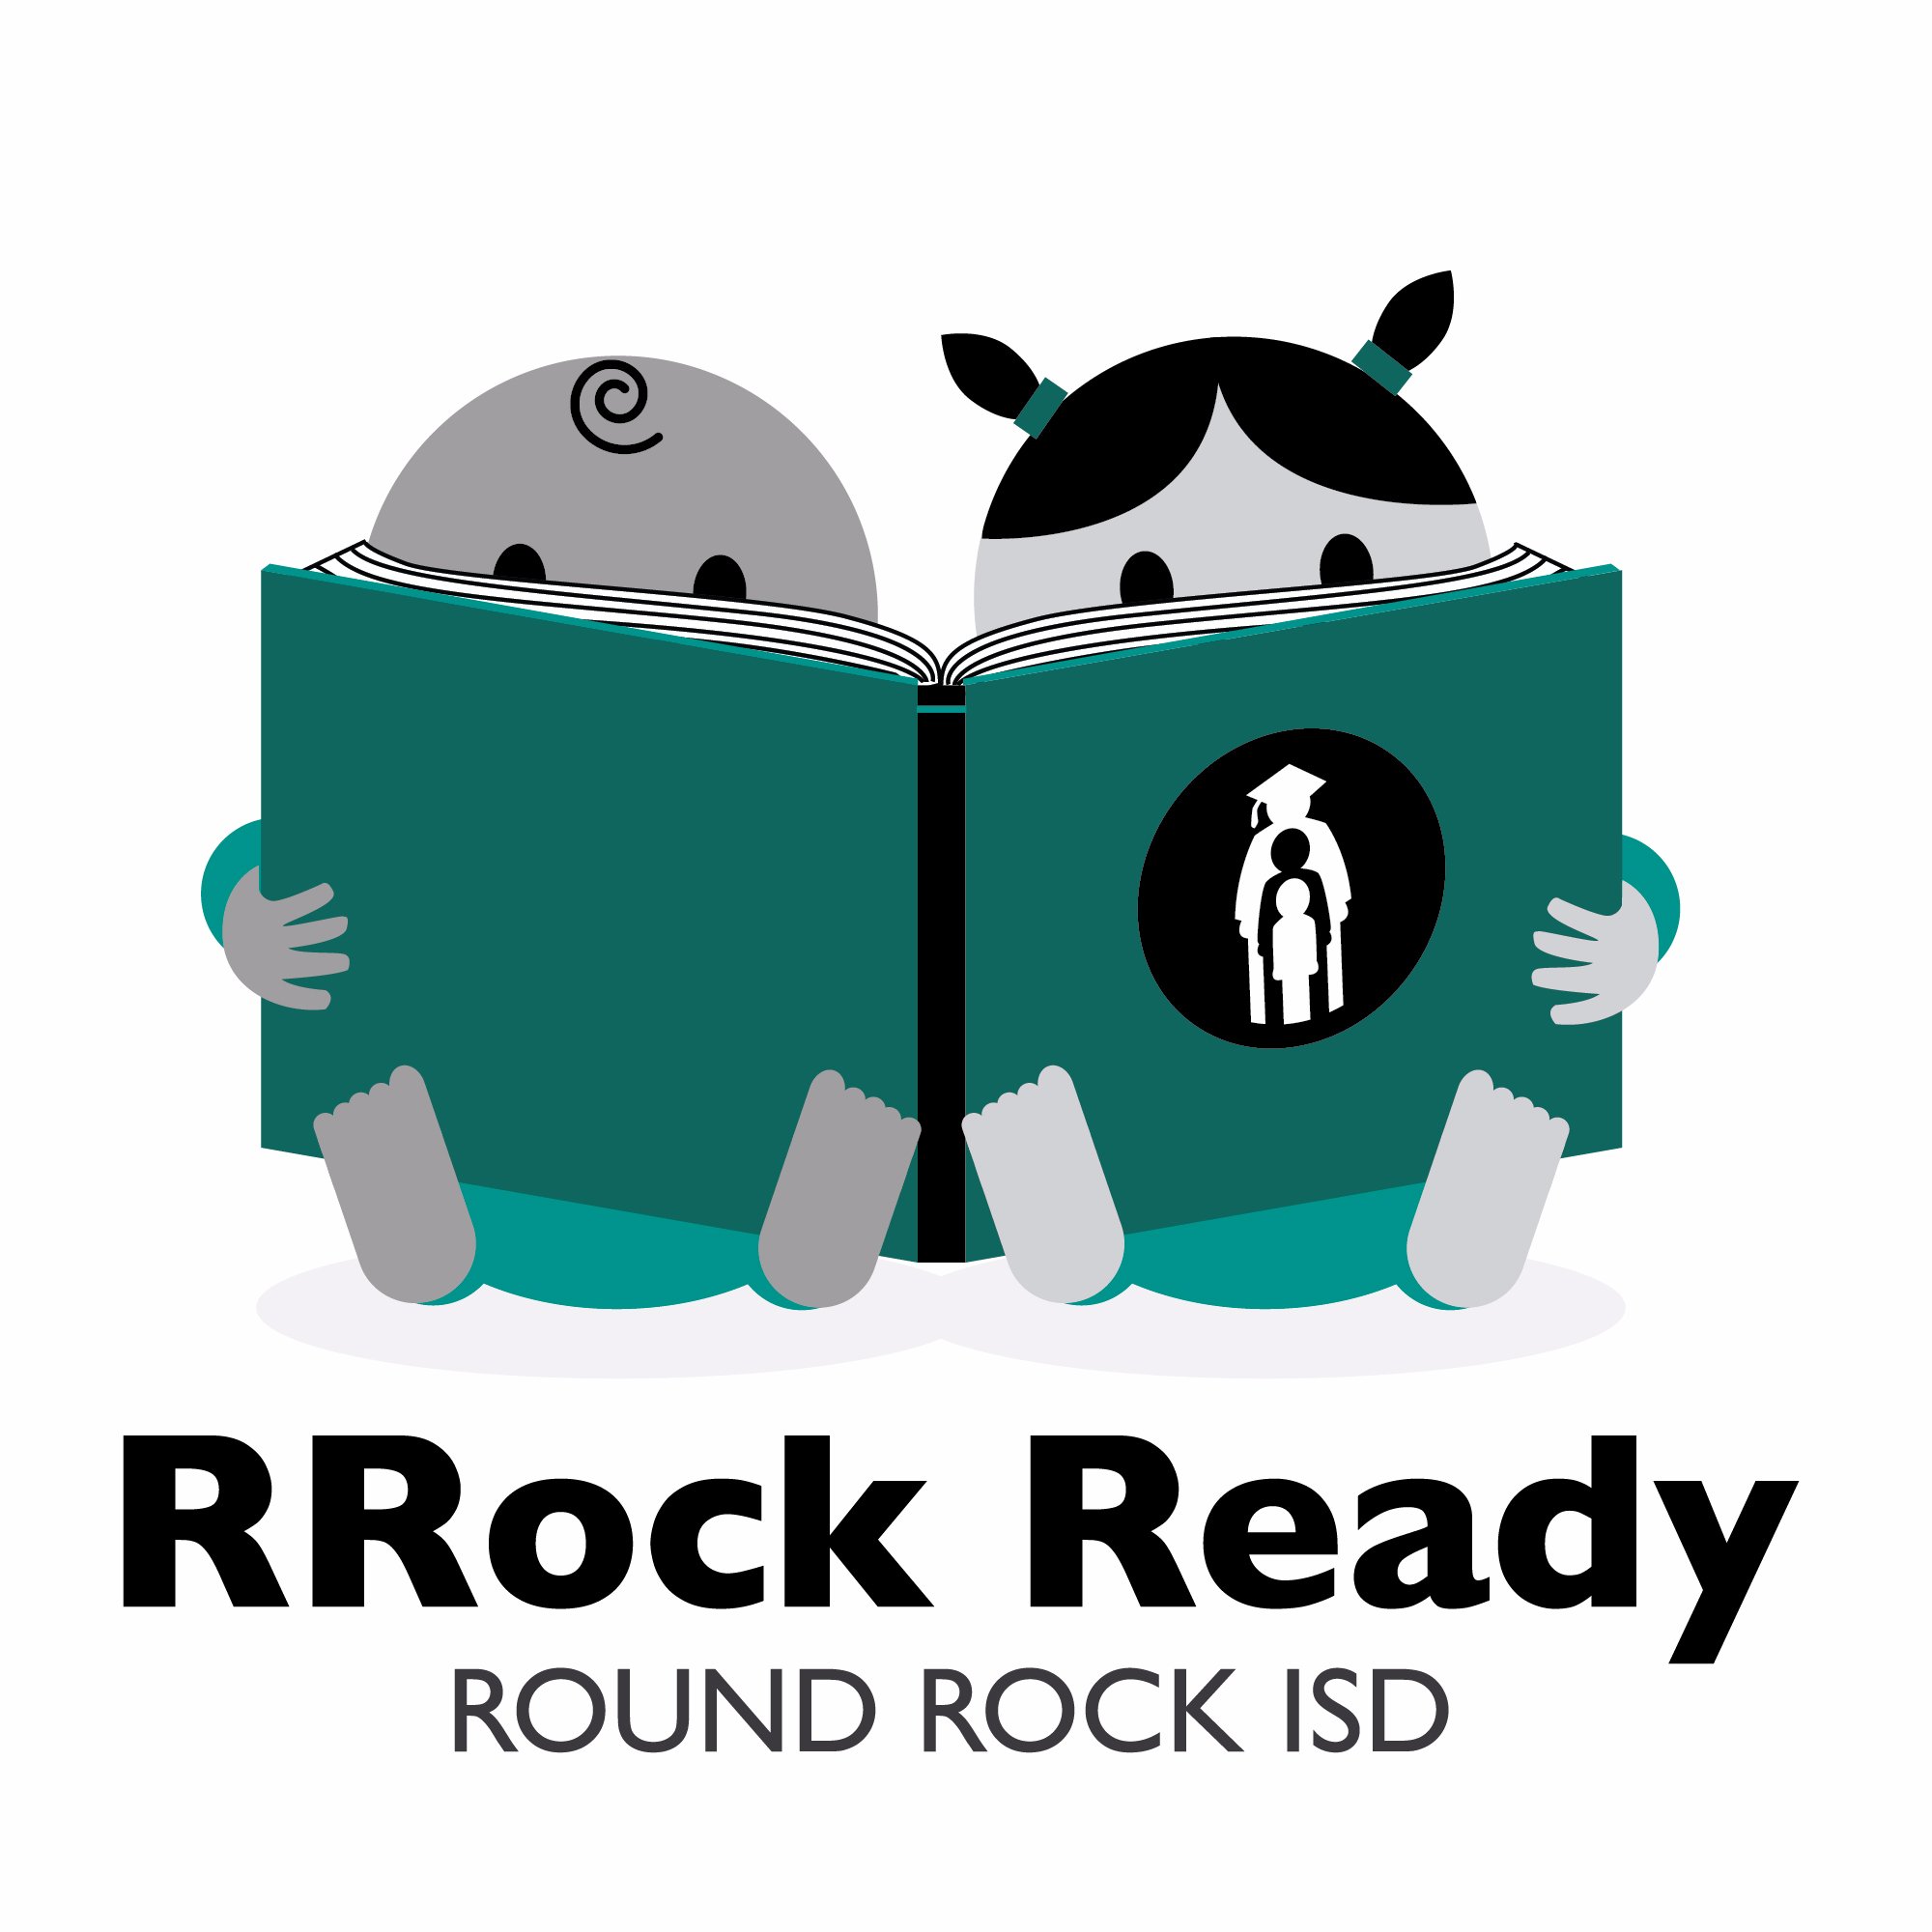 RROCK Ready is a community partnership fostering early literacy development prior to students entering school.